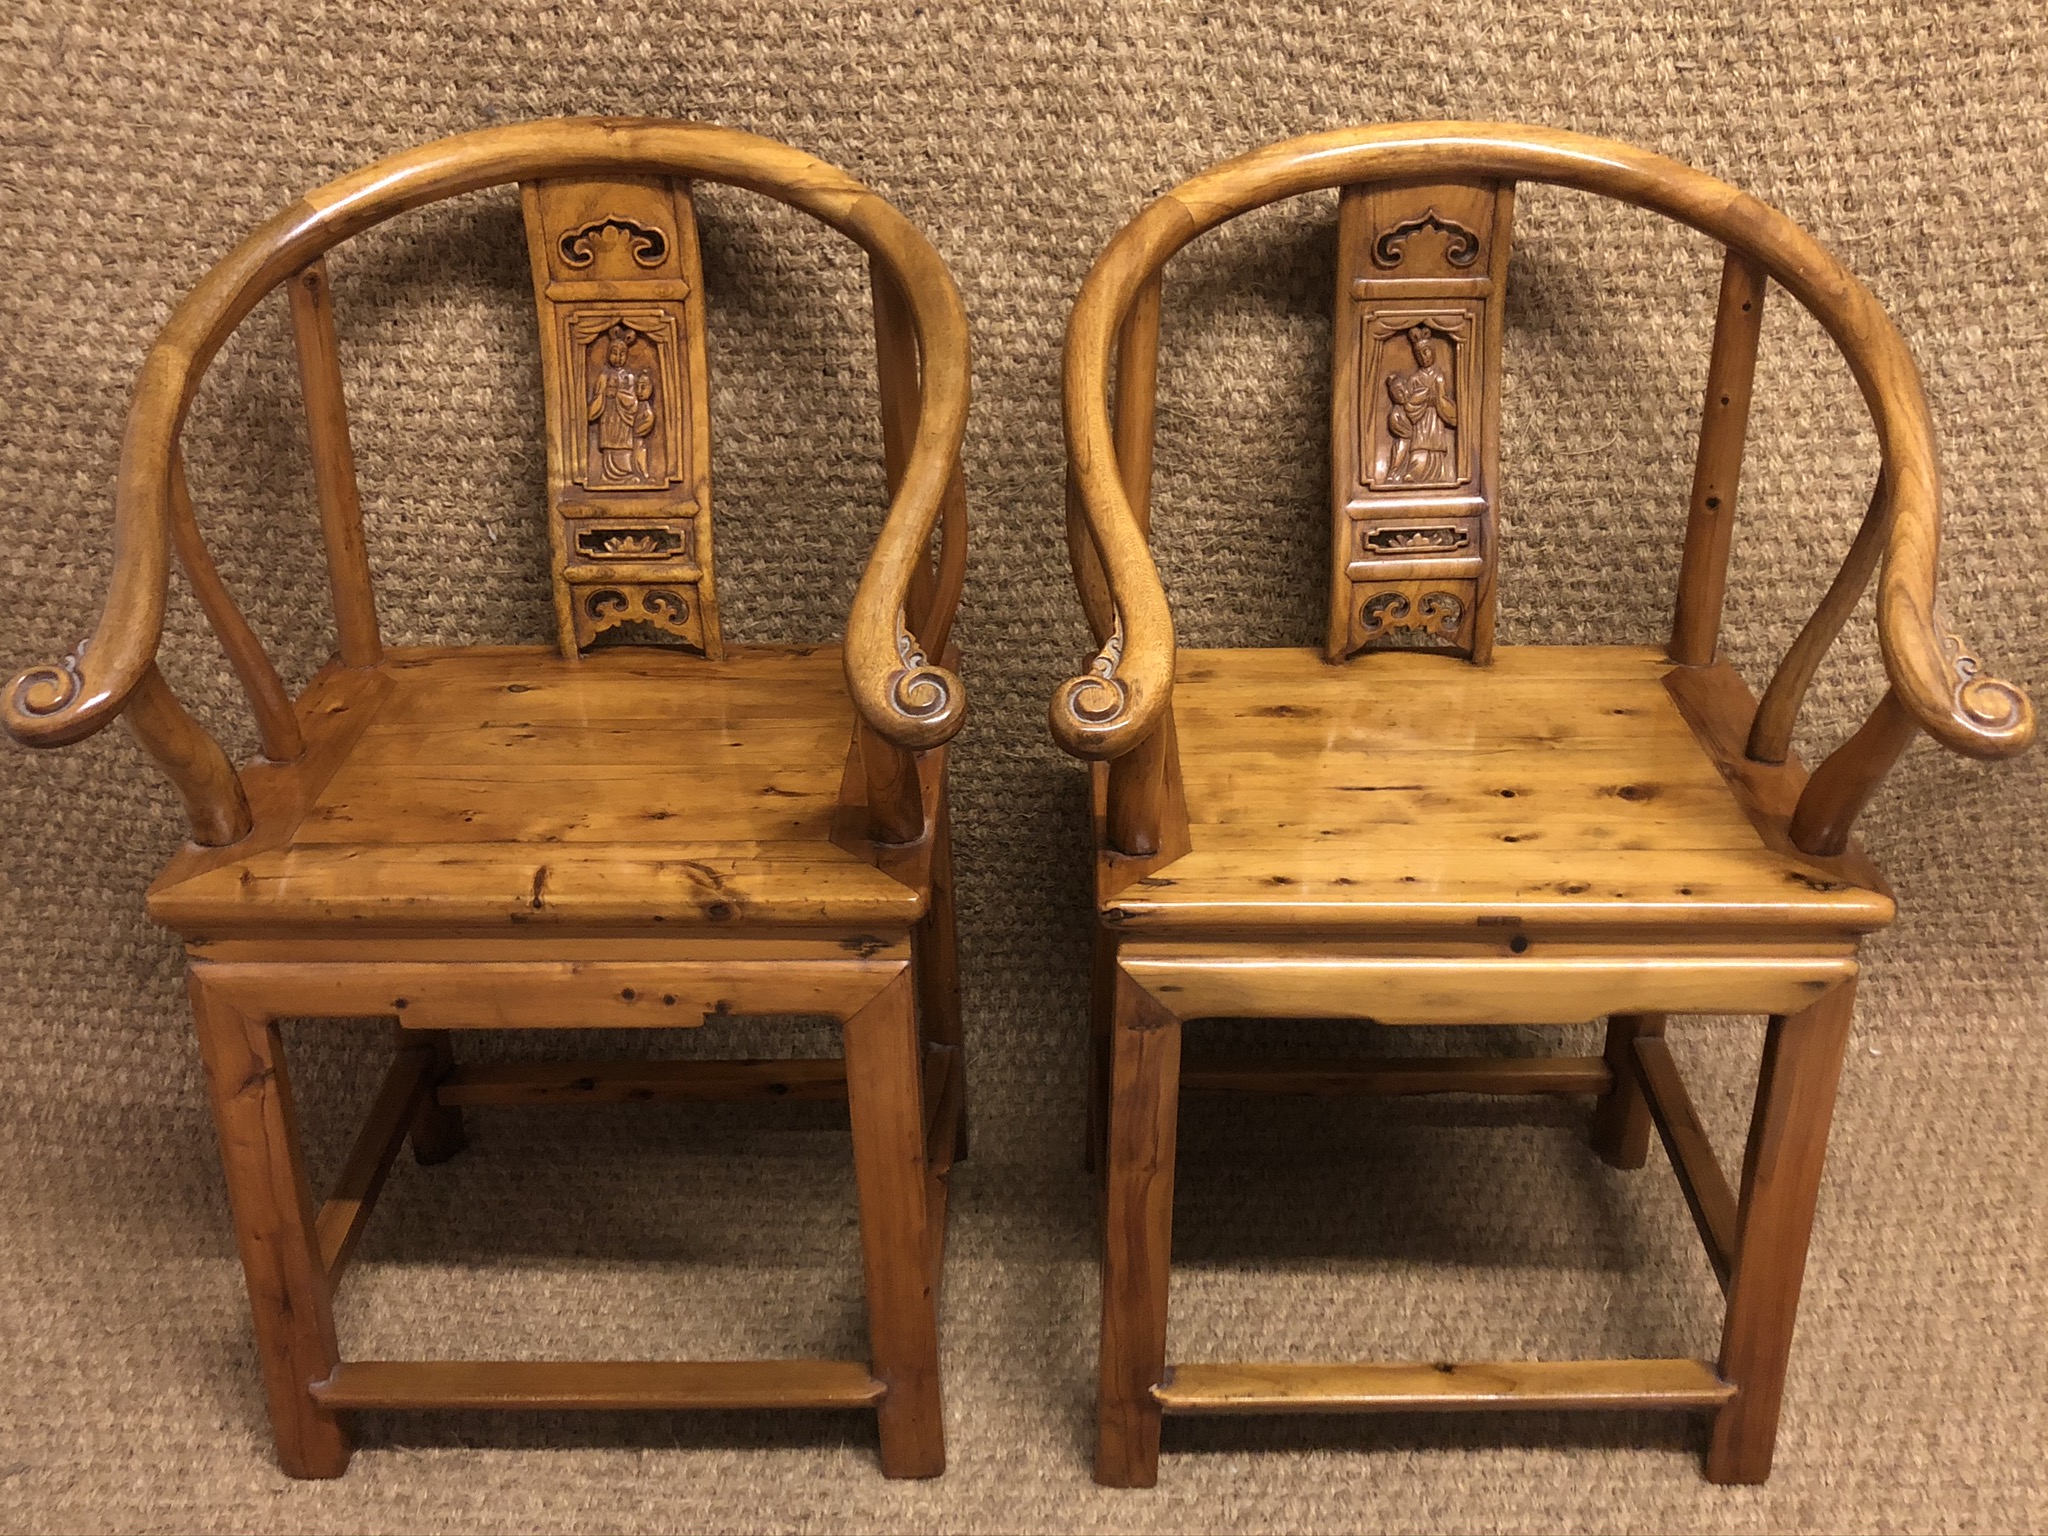 A pair of traditional Chinese armchairs